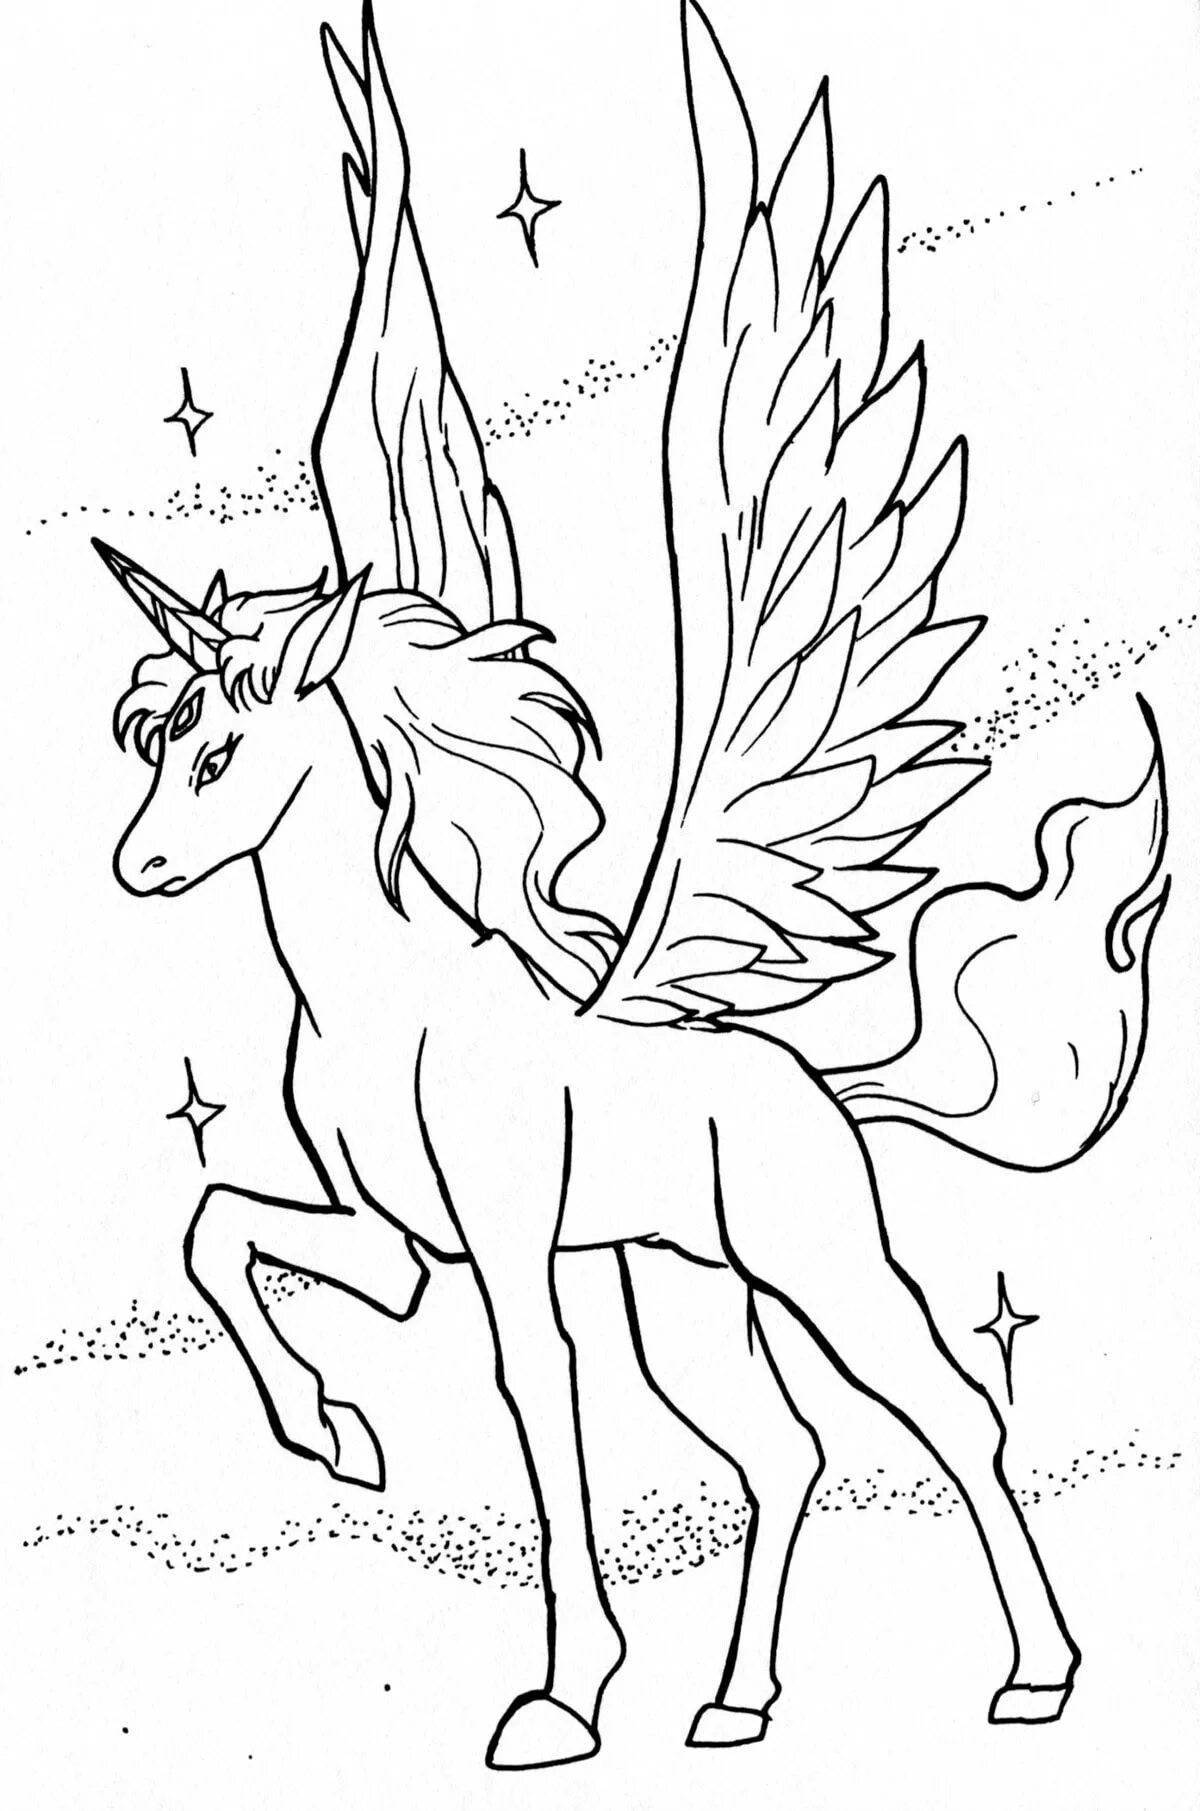 Shiny coloring unicorn with wings for kids